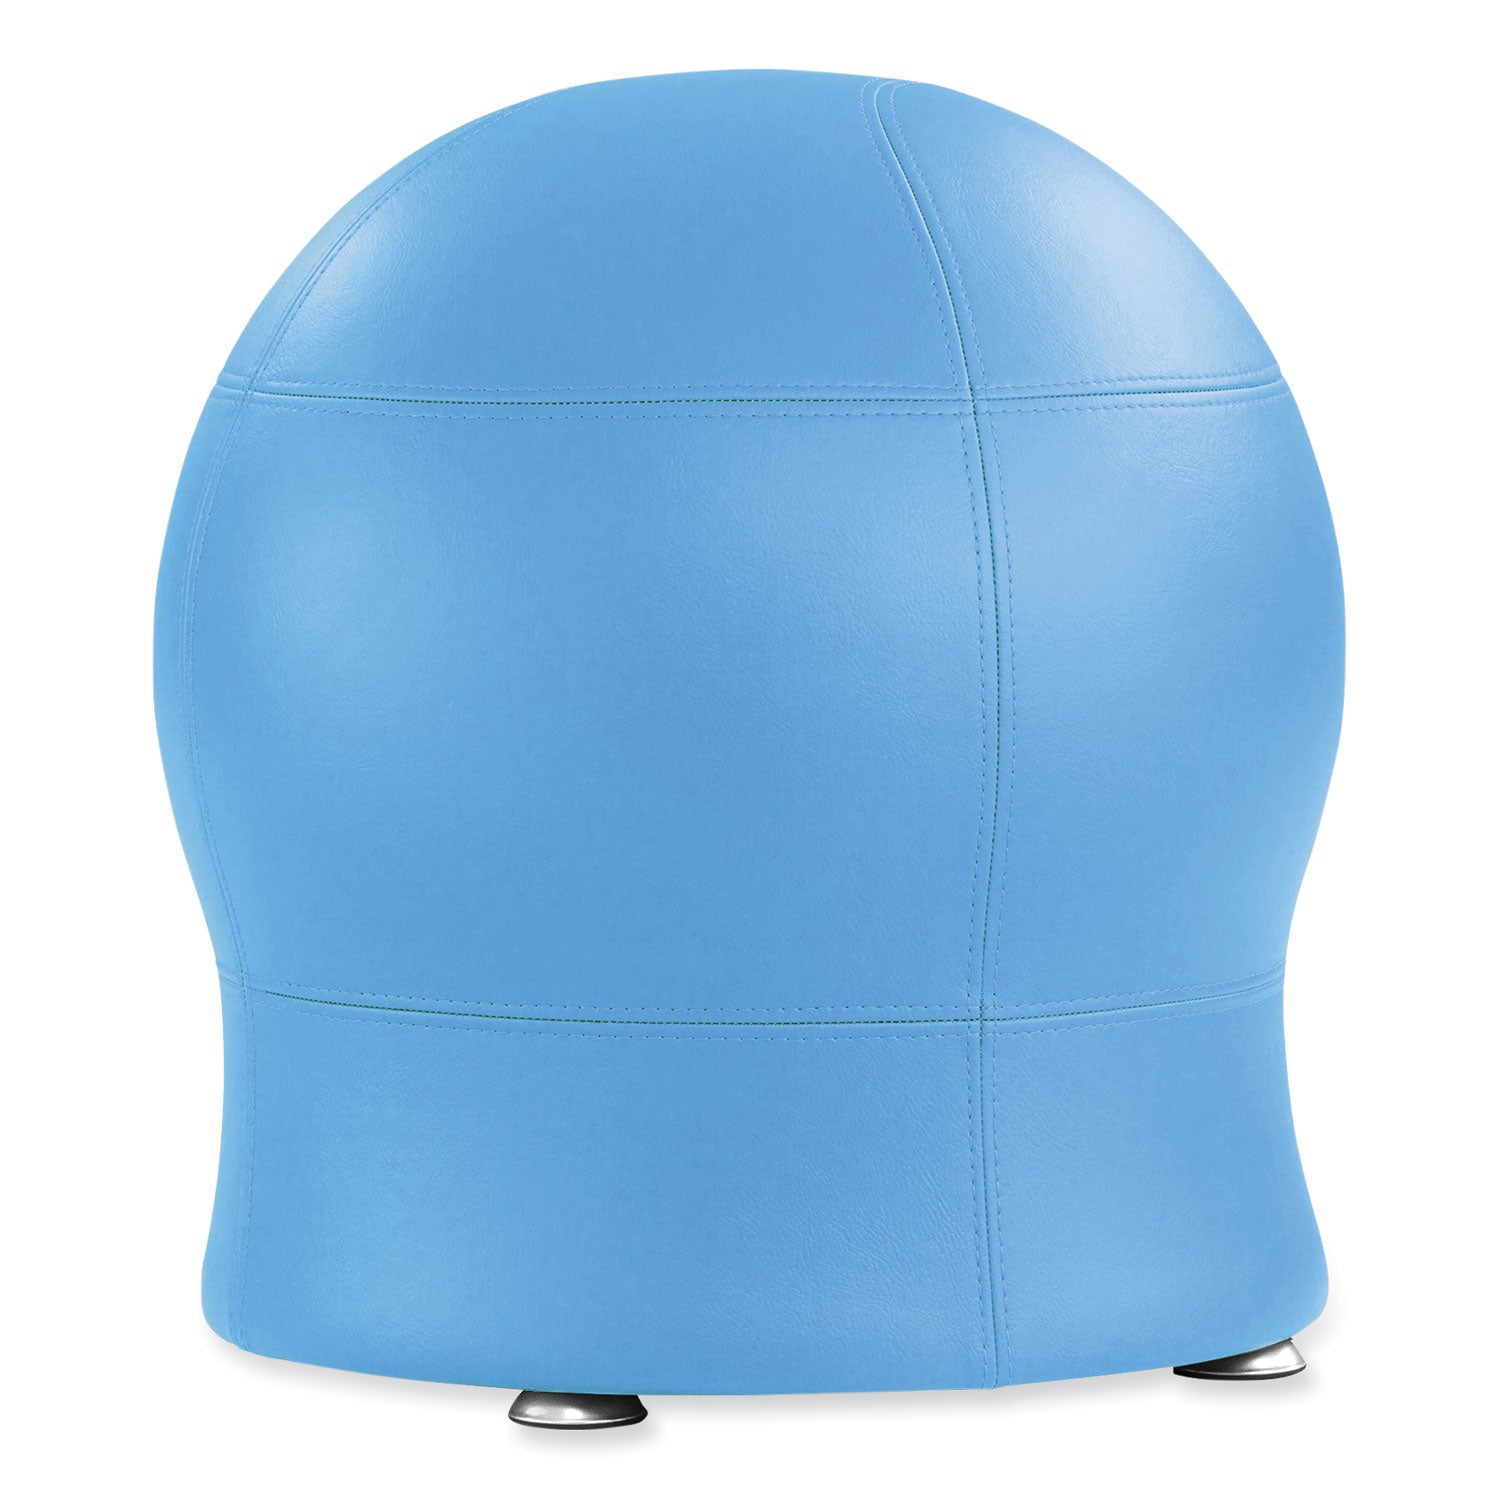 zenergy-ball-chair-backless-supports-up-to-250-lb-baby-blue-vinyl-ships-in-1-3-business-days_saf4751buv - 2